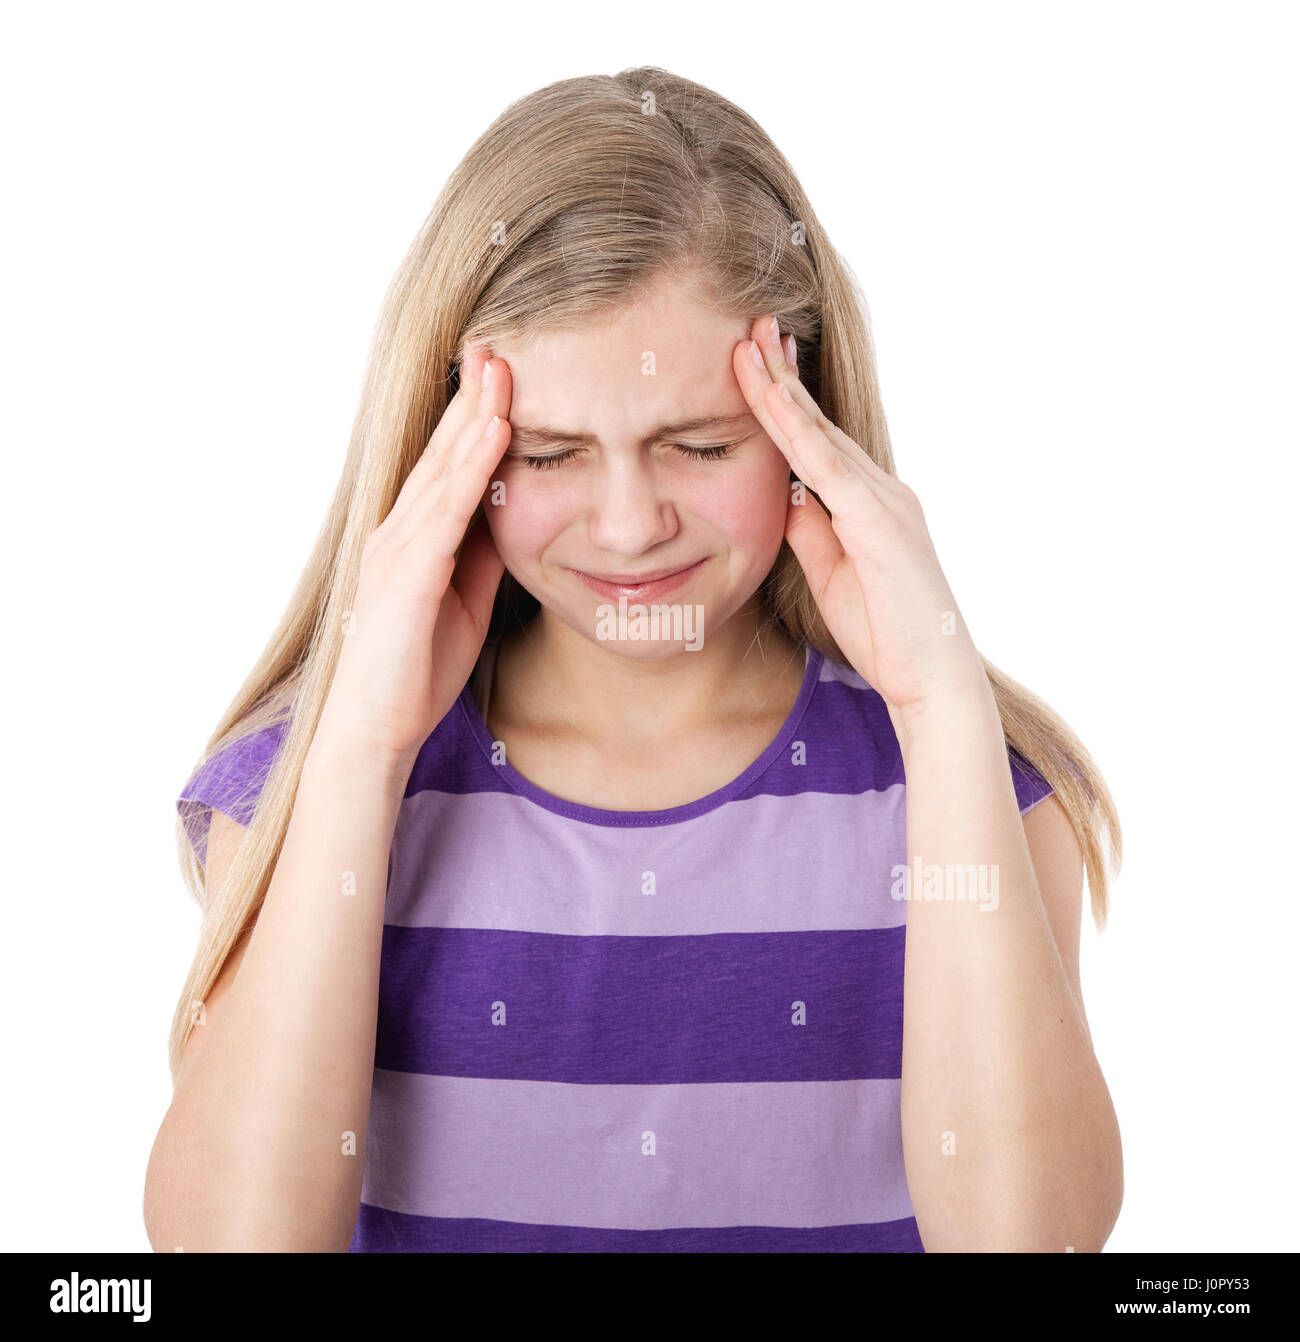 portrait of a girl with headache Stock Photo